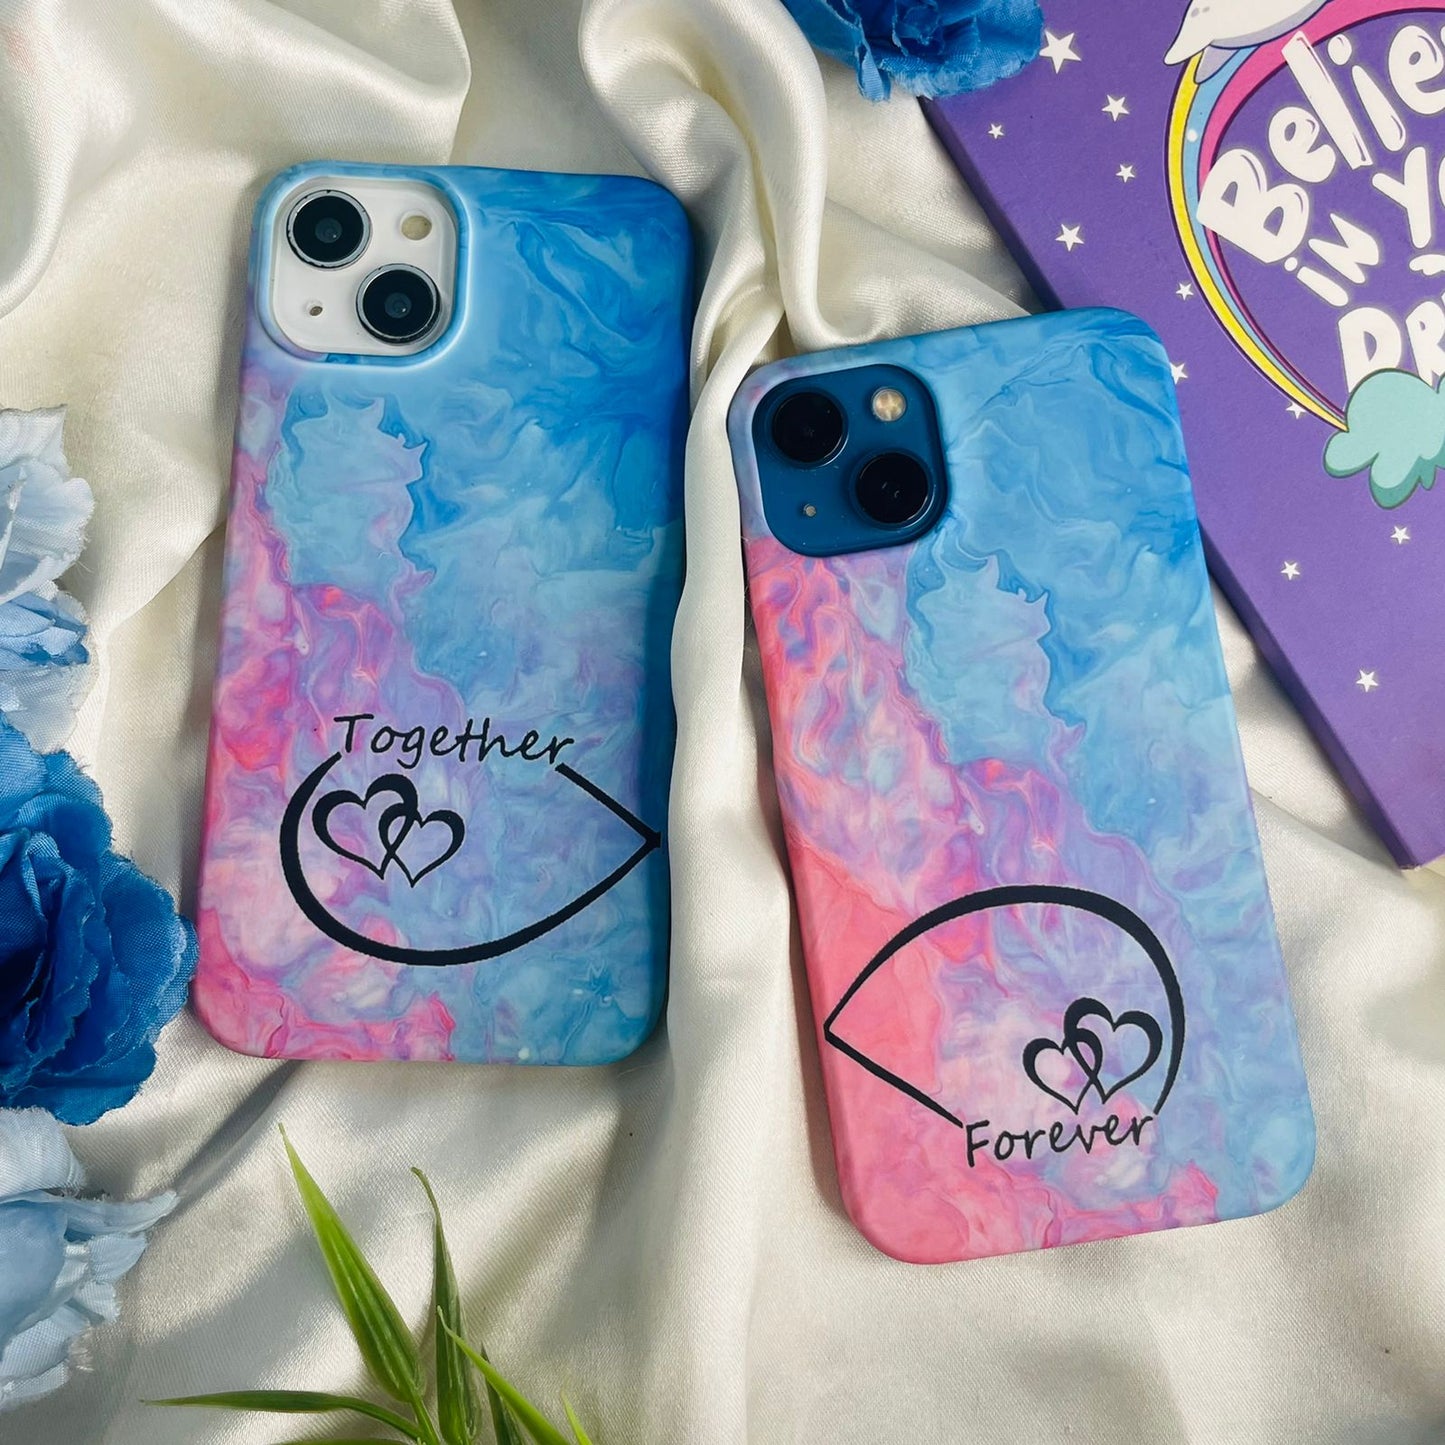 Together & Forever Couple Case